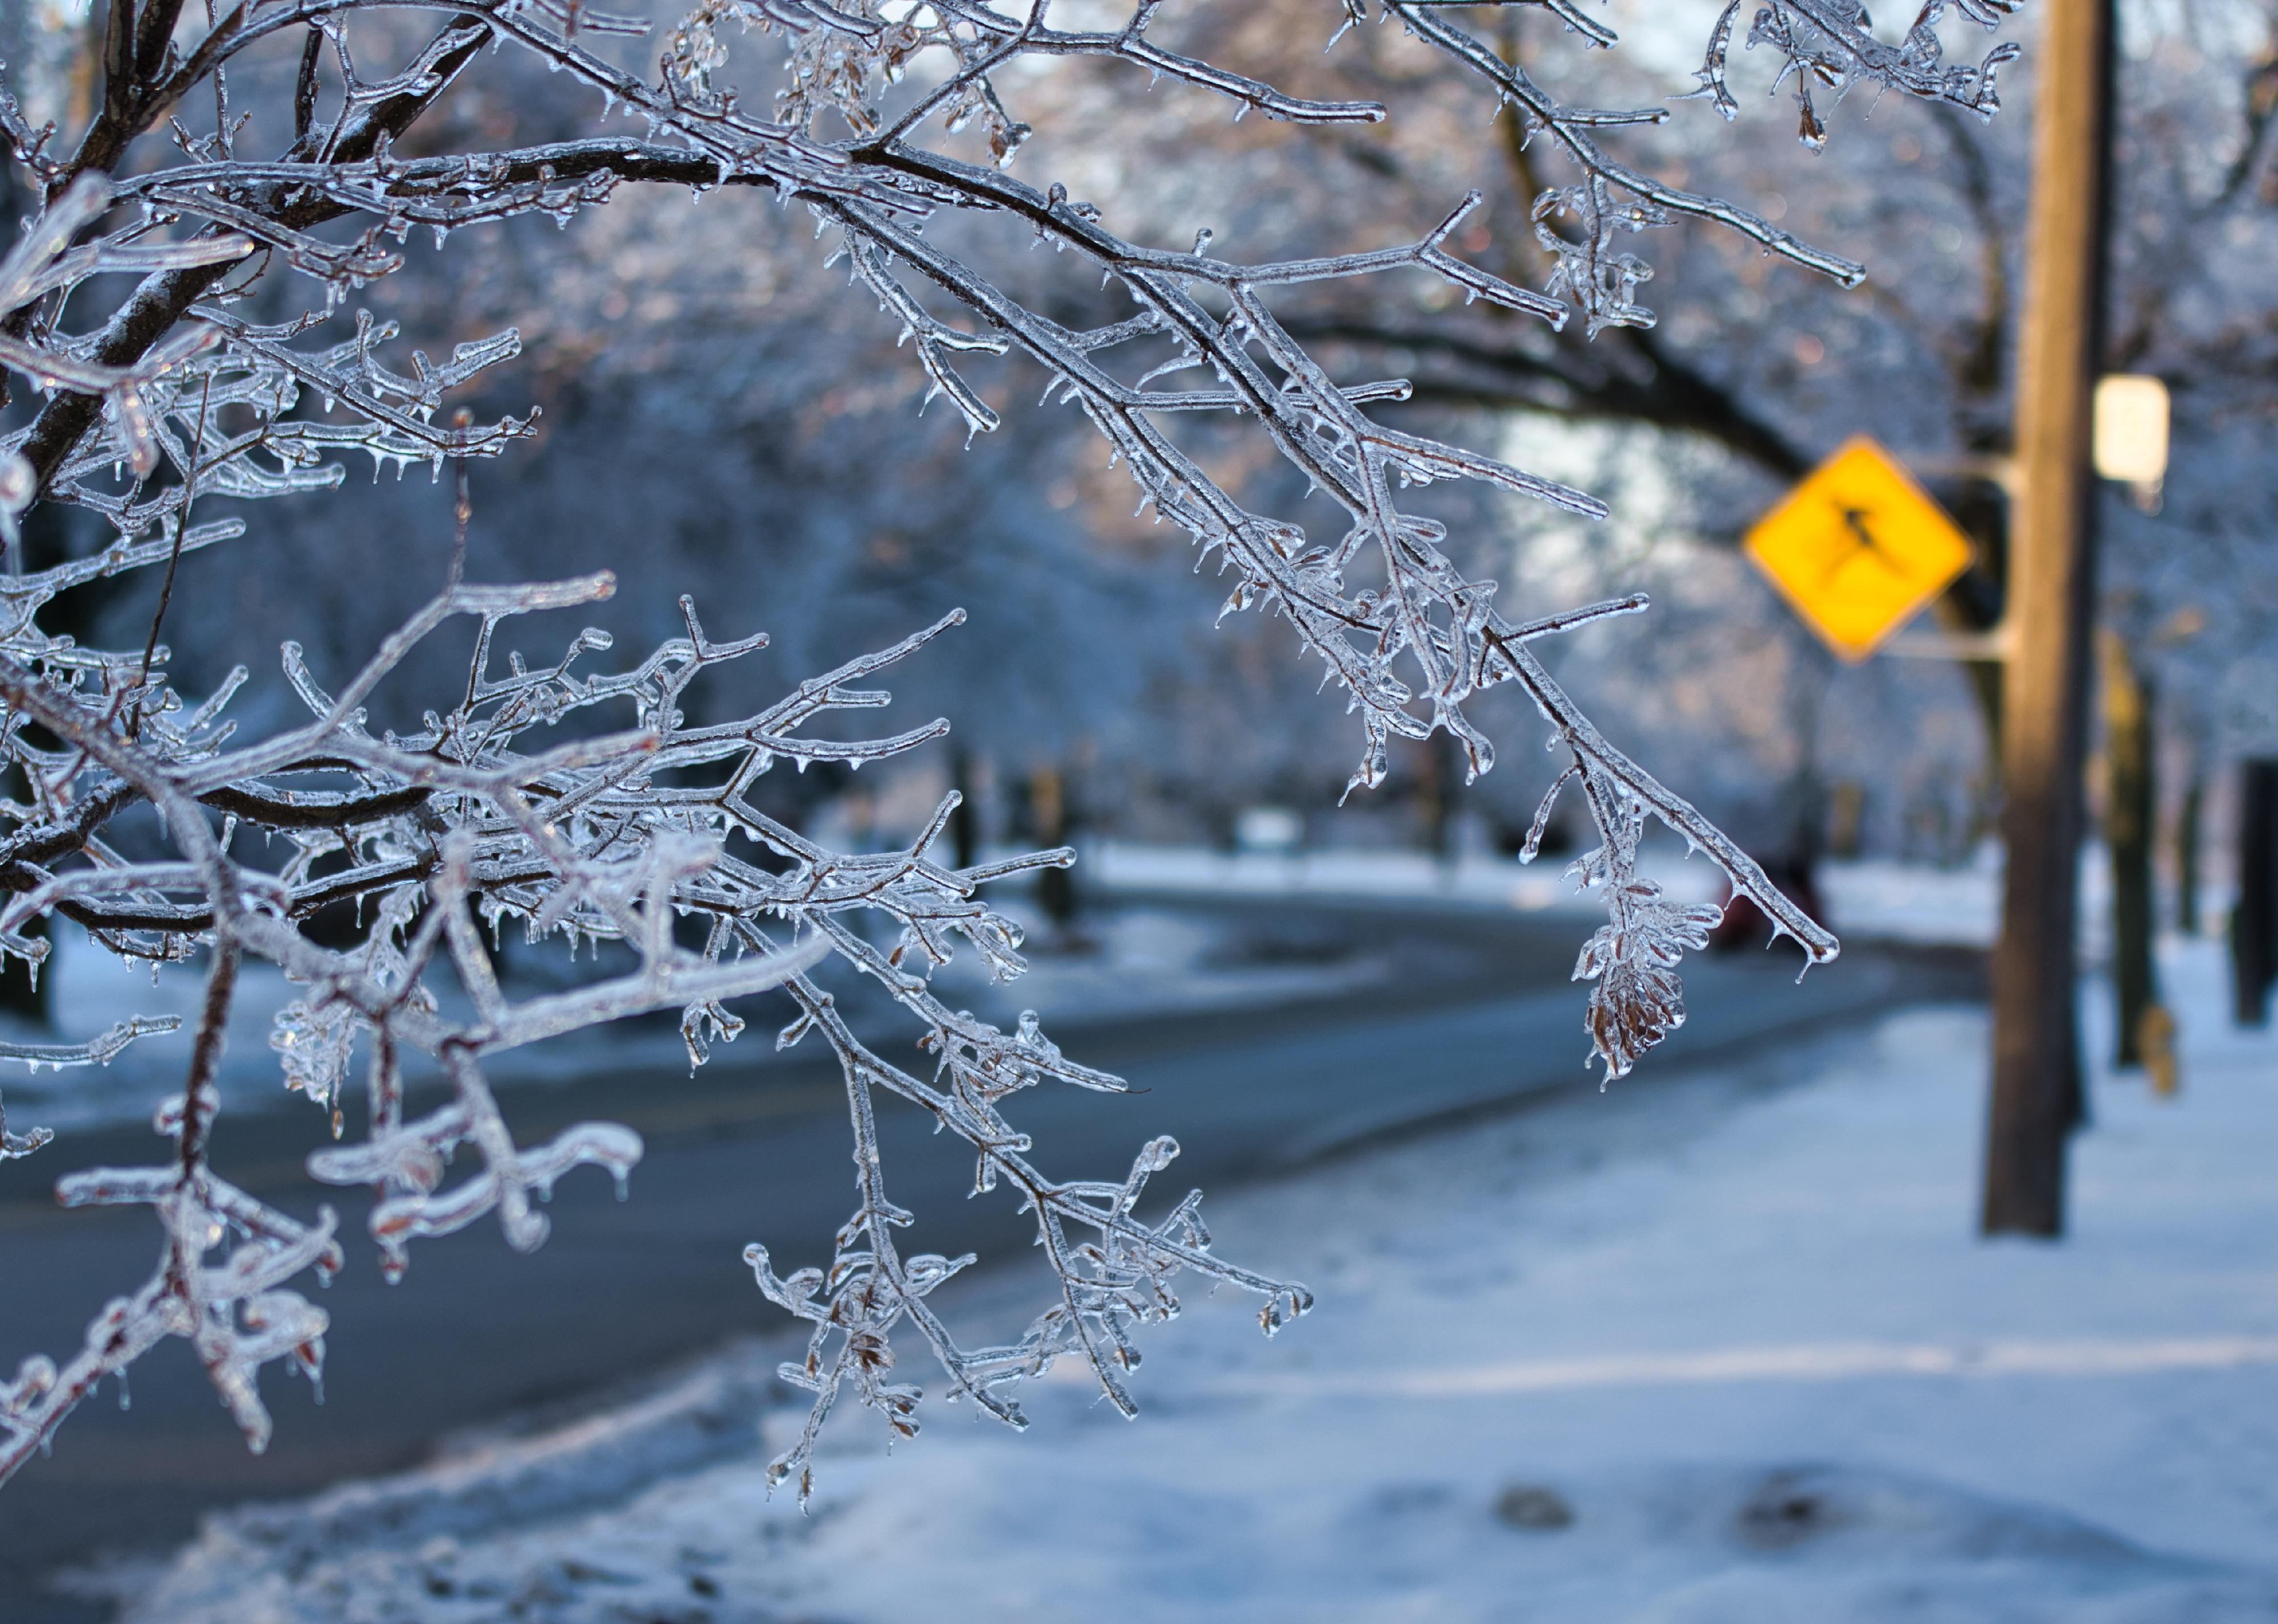 Frozen branches with crossing sign in the background.